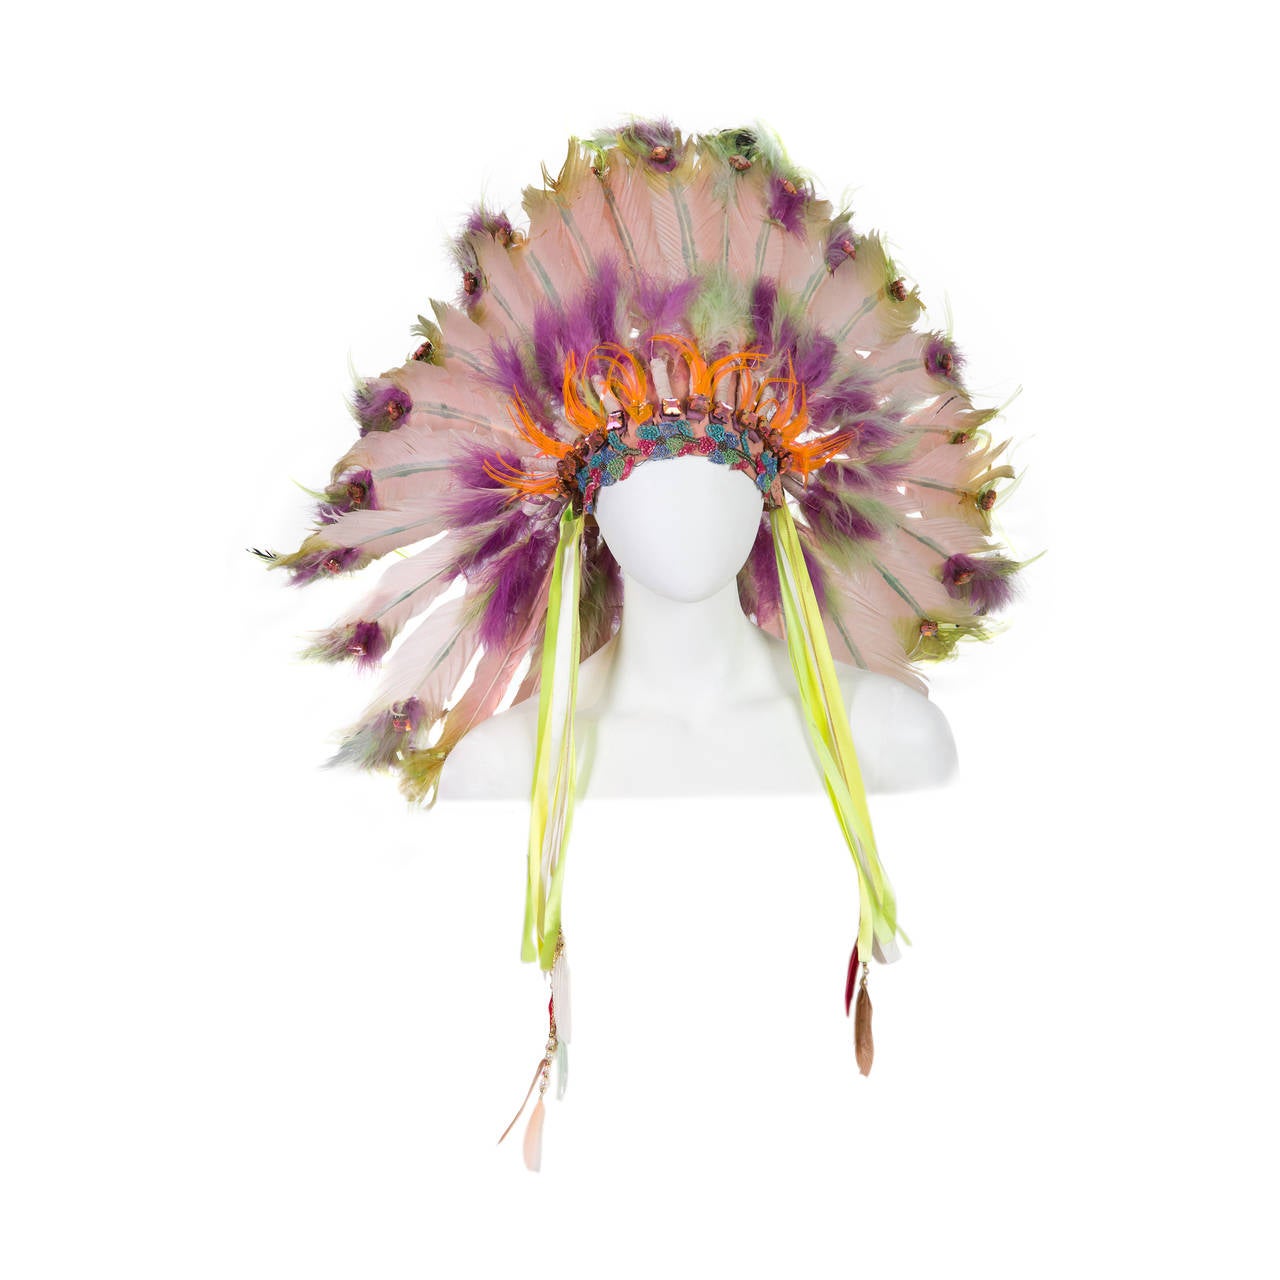 1960s Native American Style Showgirl Headress from the Sands Hotel Las Vegas